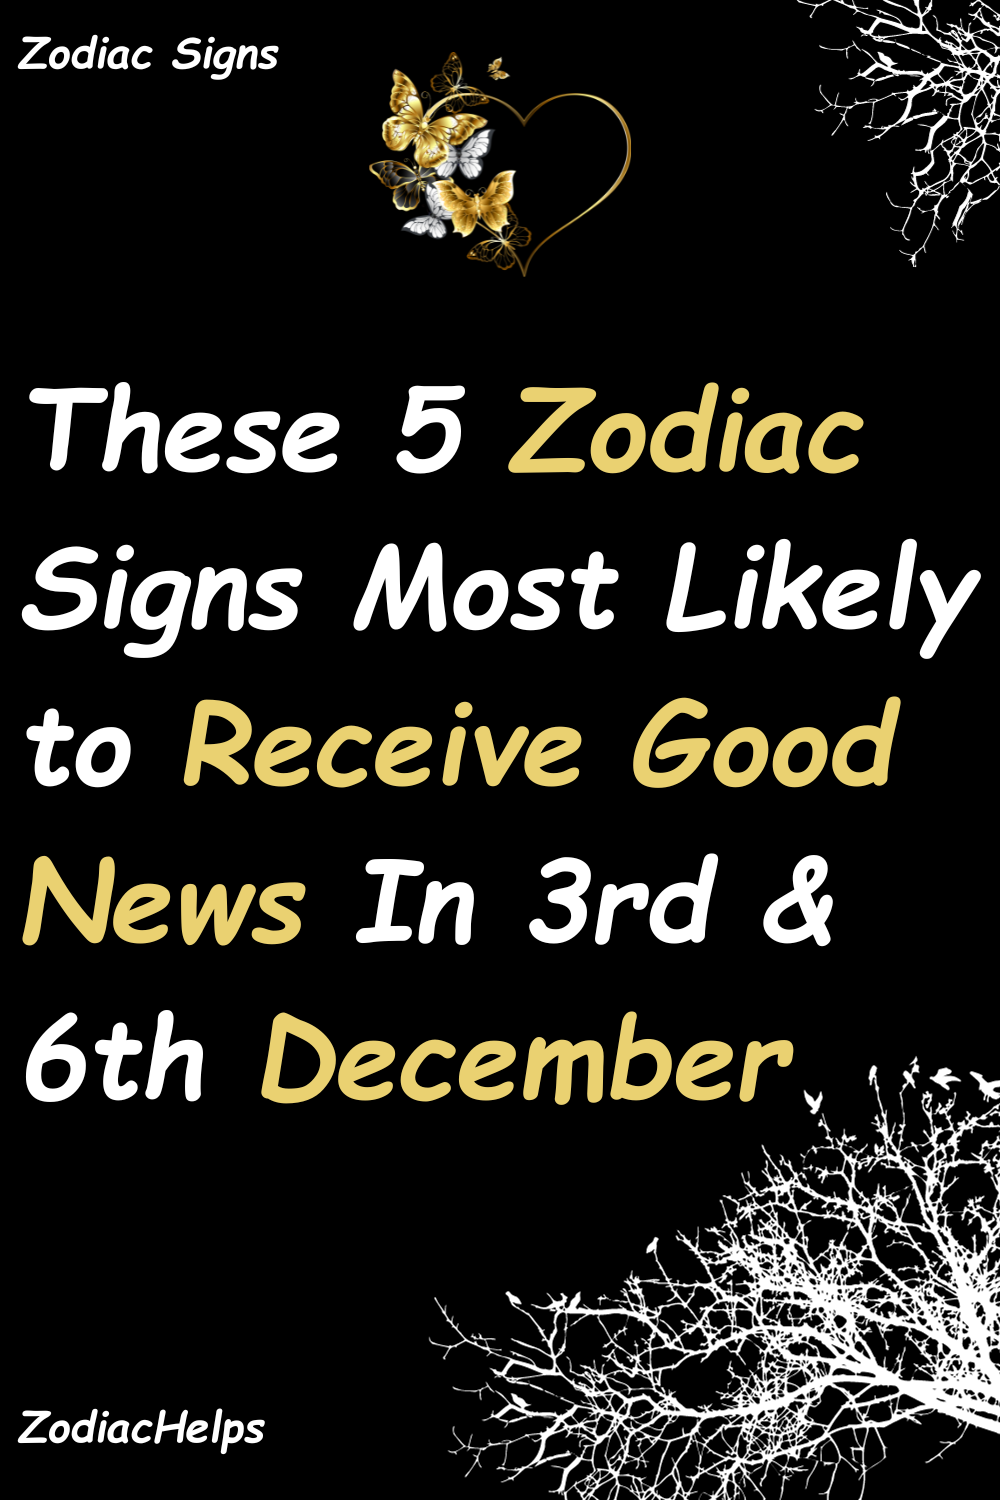 These 5 Zodiac Signs Most Likely to Receive Good News In 3rd & 6th December